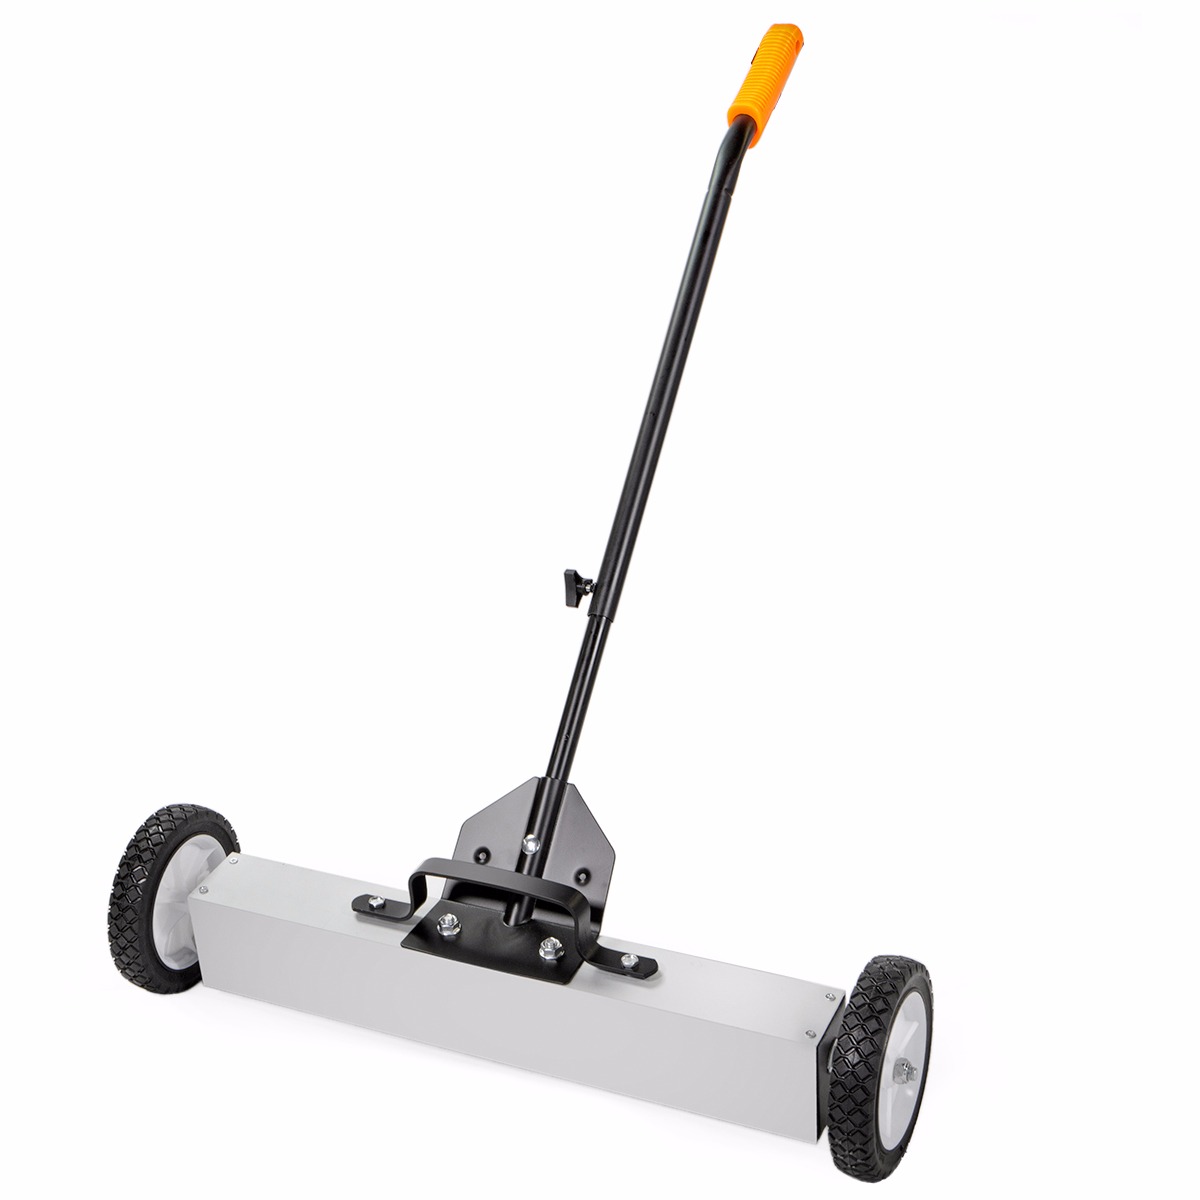 Wholesale Dealers of Magnetic Sweeper Export to Orlando